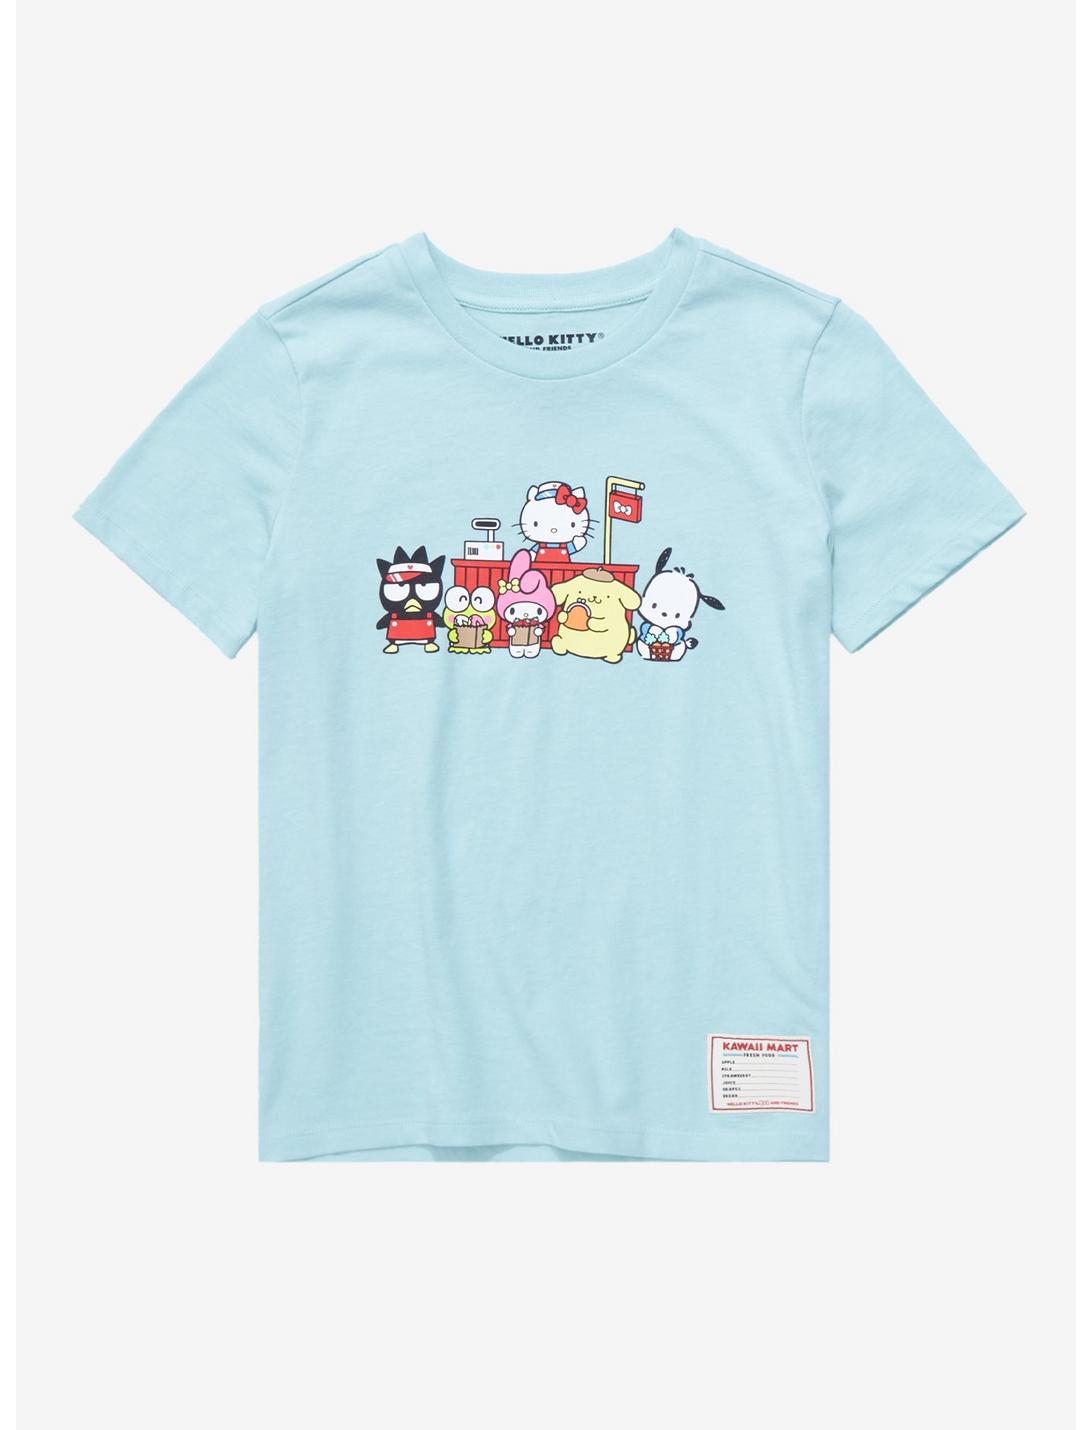 Sanrio Hello Kitty and Friends Kawaii Mart Group Portrait Youth T-Shirt - BoxLunch Exclusive, SEAFOAM, hi-res